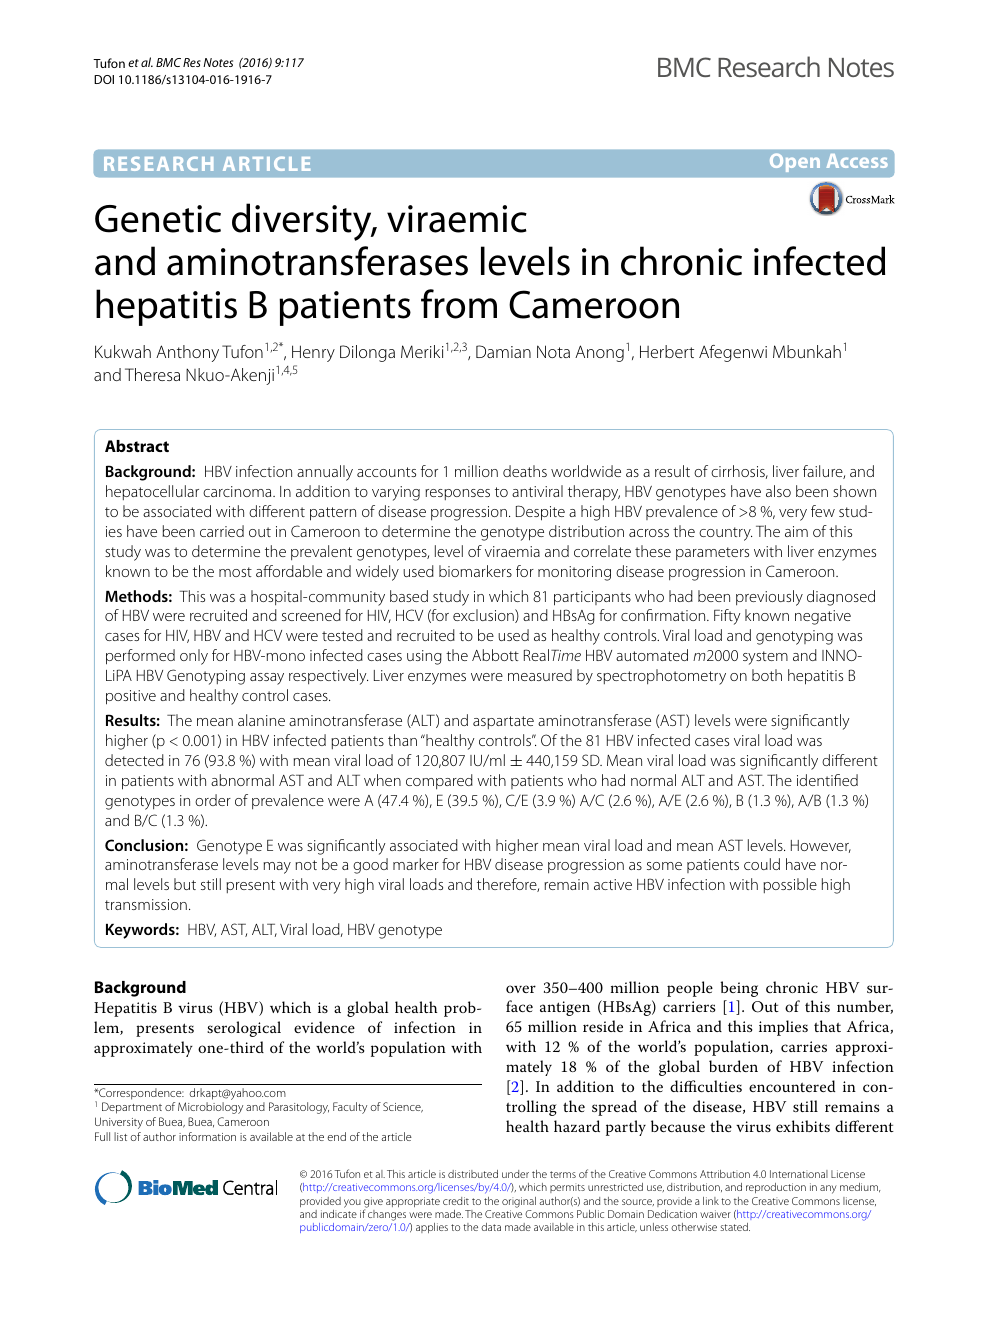 Genetic Diversity Viraemic And Aminotransferases Levels In Chronic Infected Hepatitis B Patients From Cameroon Topic Of Research Paper In Biological Sciences Download Scholarly Article Pdf And Read For Free On Cyberleninka